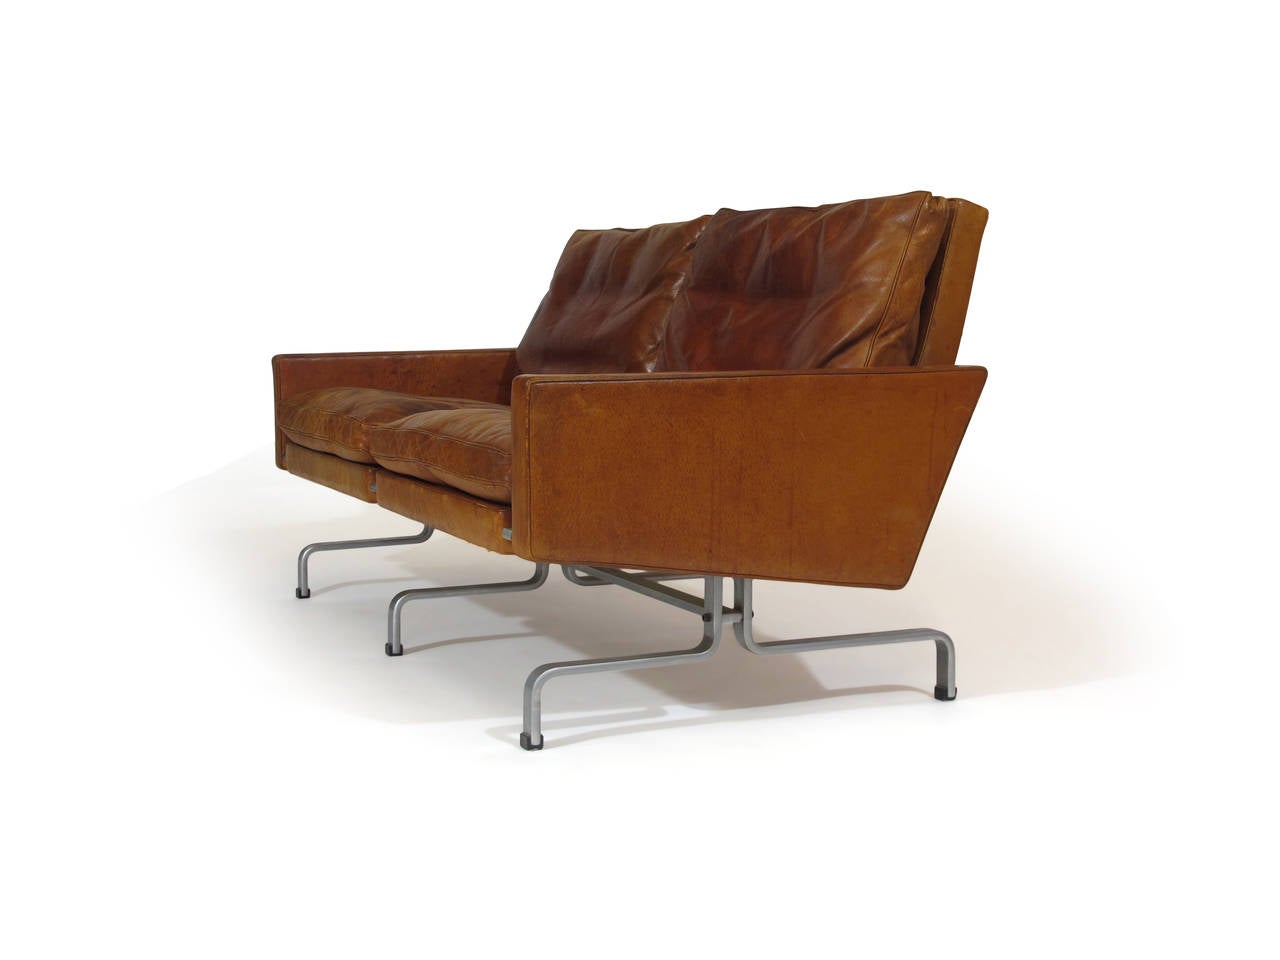 PK-31/2 flat steel and leather sofa by Poul Kjærholm for E. Kold Christensen, circa 1958. In the original red leather which has lightened and developed a heavy patina over time.